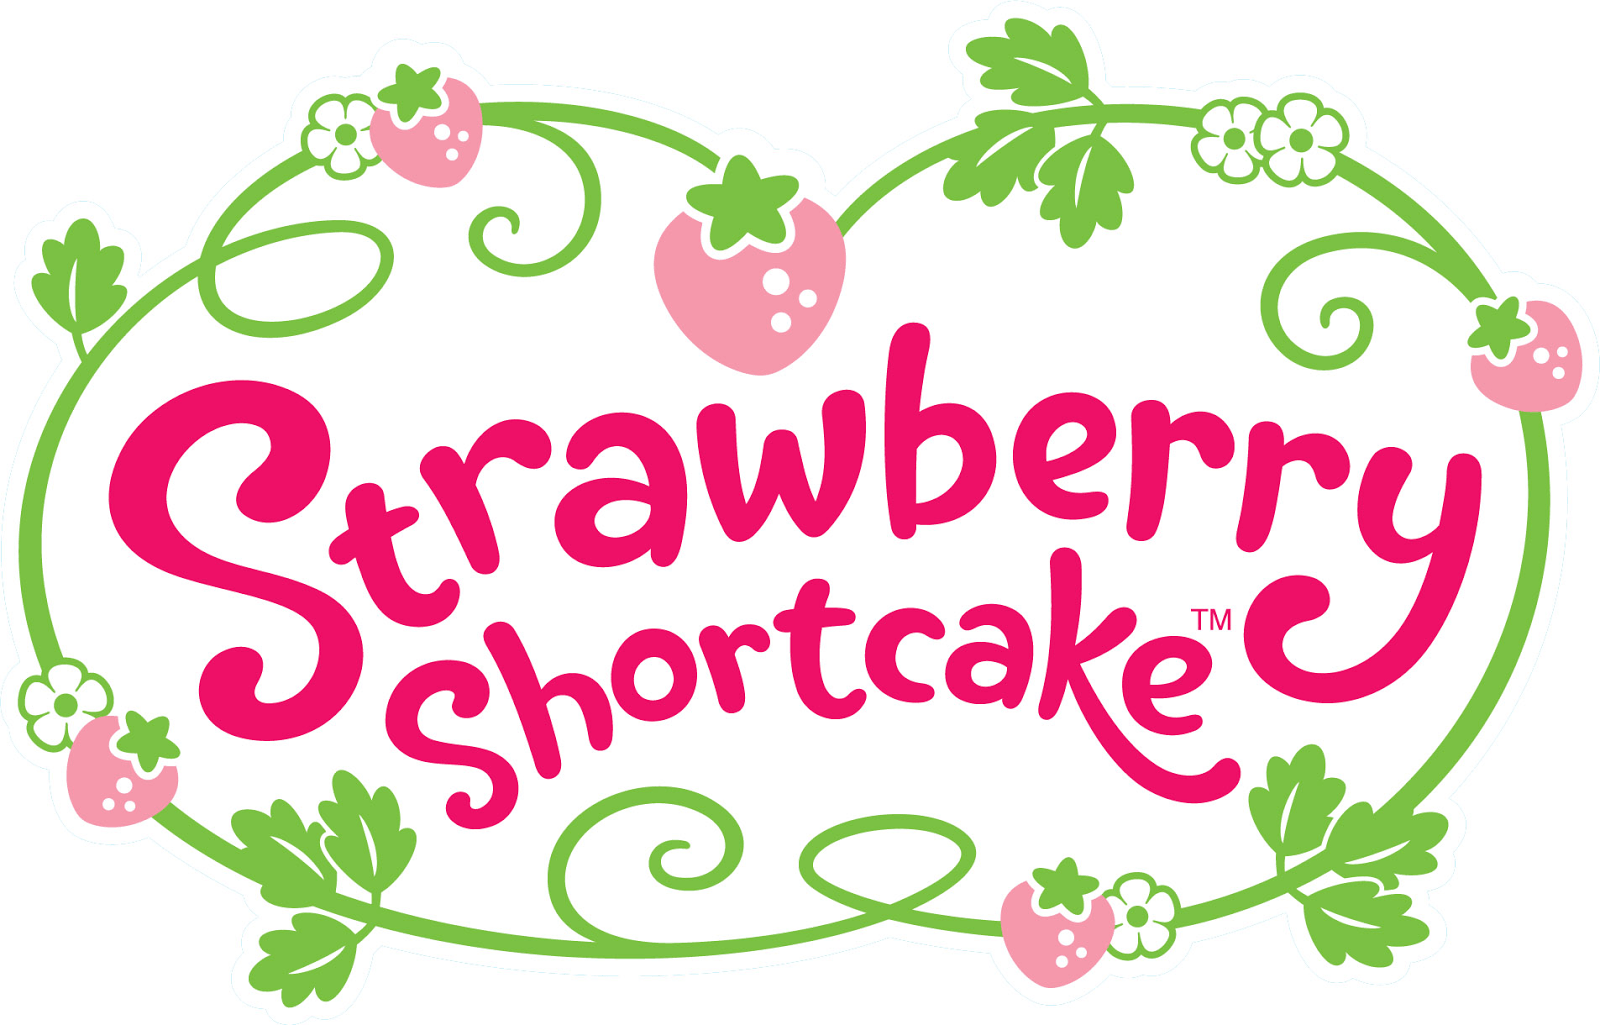 Short Cake Colorful Wallpaper Coloring Book Pages  Strawberry Shortcake  And Raspberry Torte Transparent PNG  470x700  Free Download on NicePNG